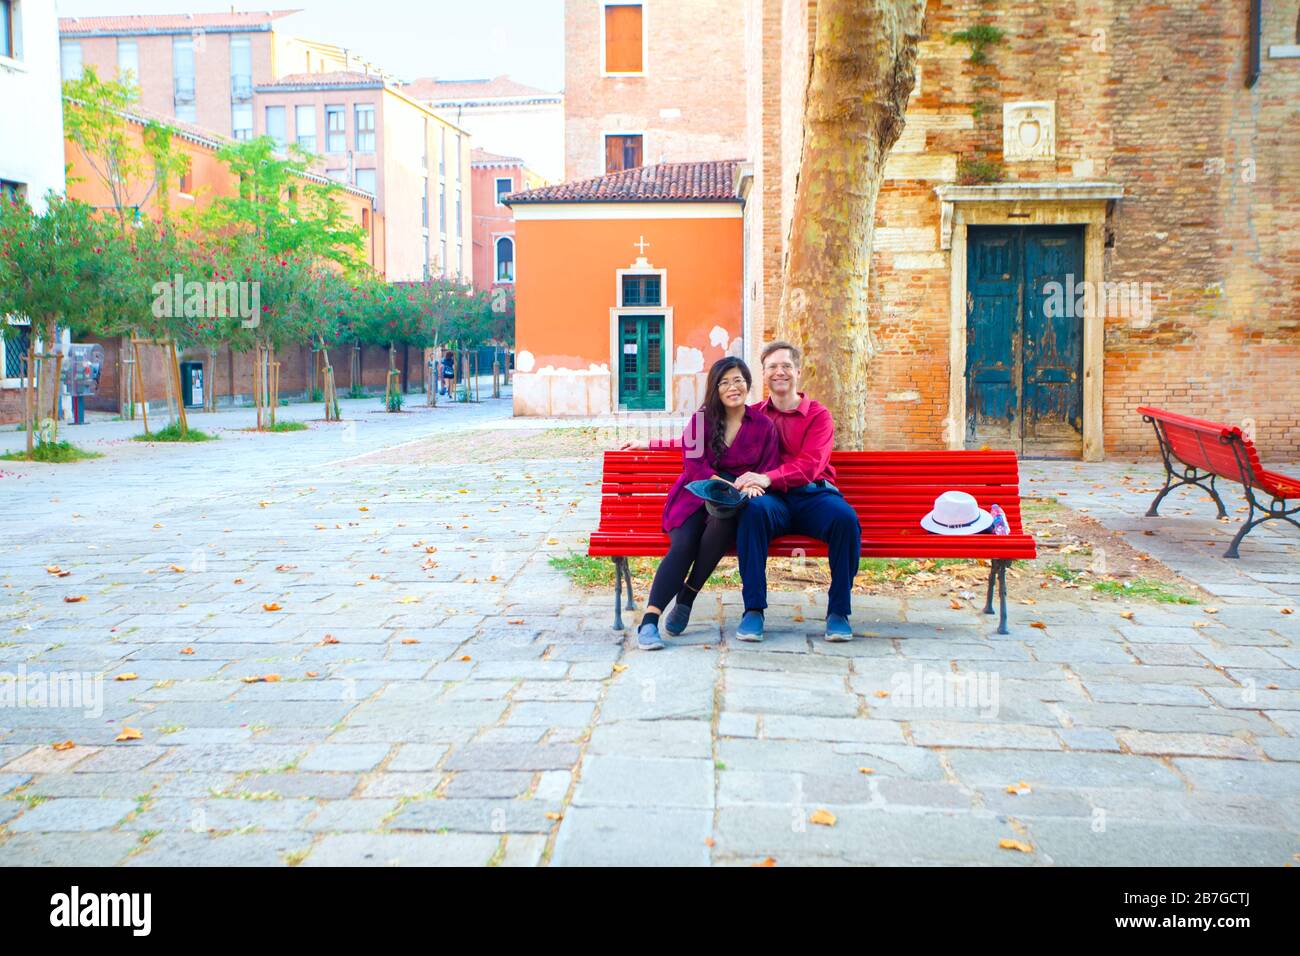 Multiracial tourist couple, Asian Caucasian,  in early fifties sitting together on red bench in empty town square in Venice, Italy Stock Photo